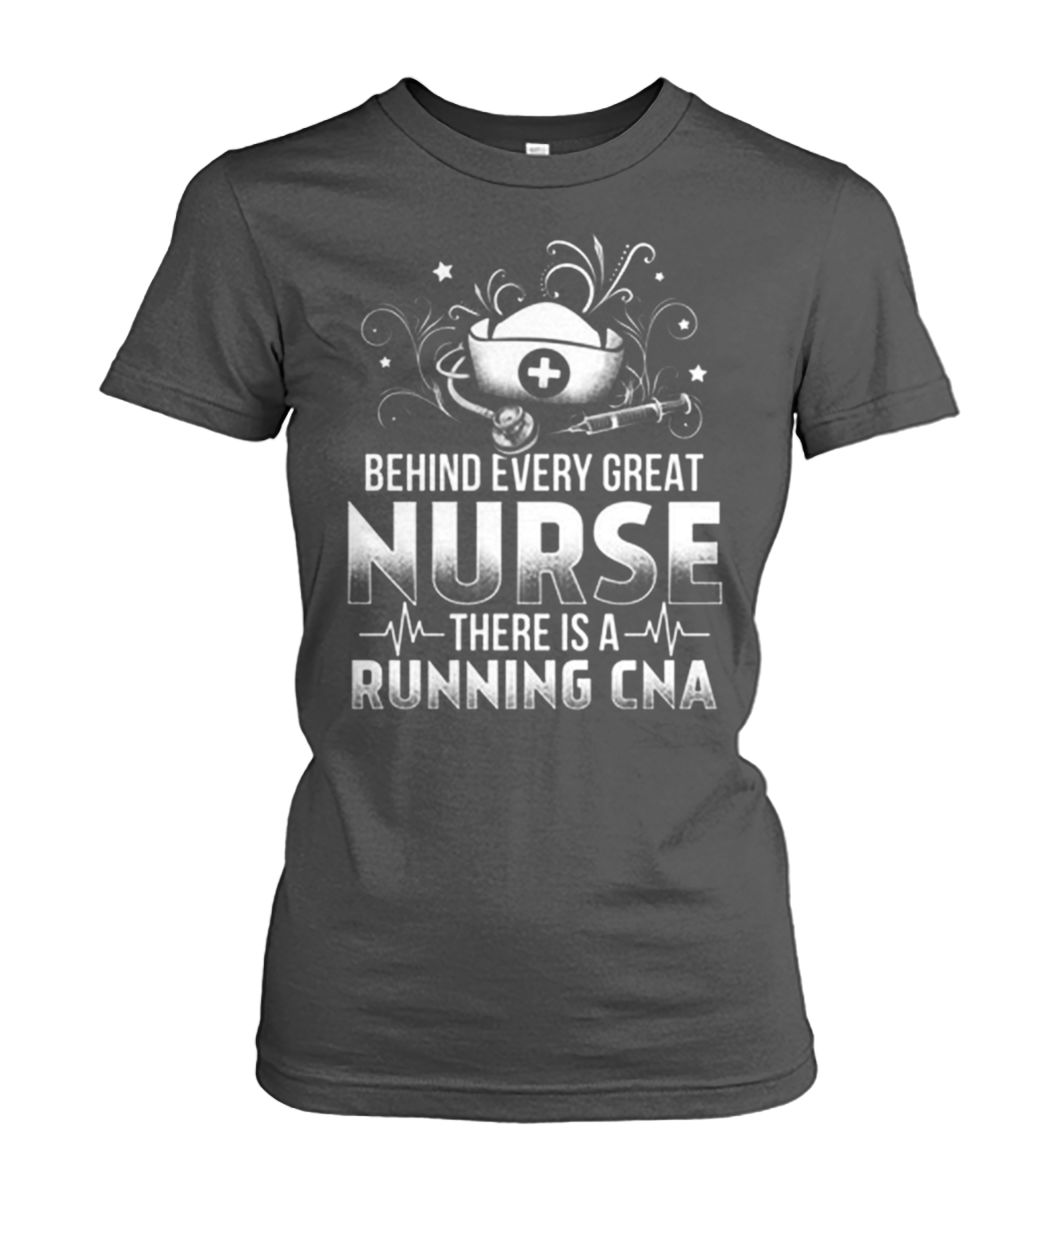 Behind every great nurse there is a running CNA women's crew tee